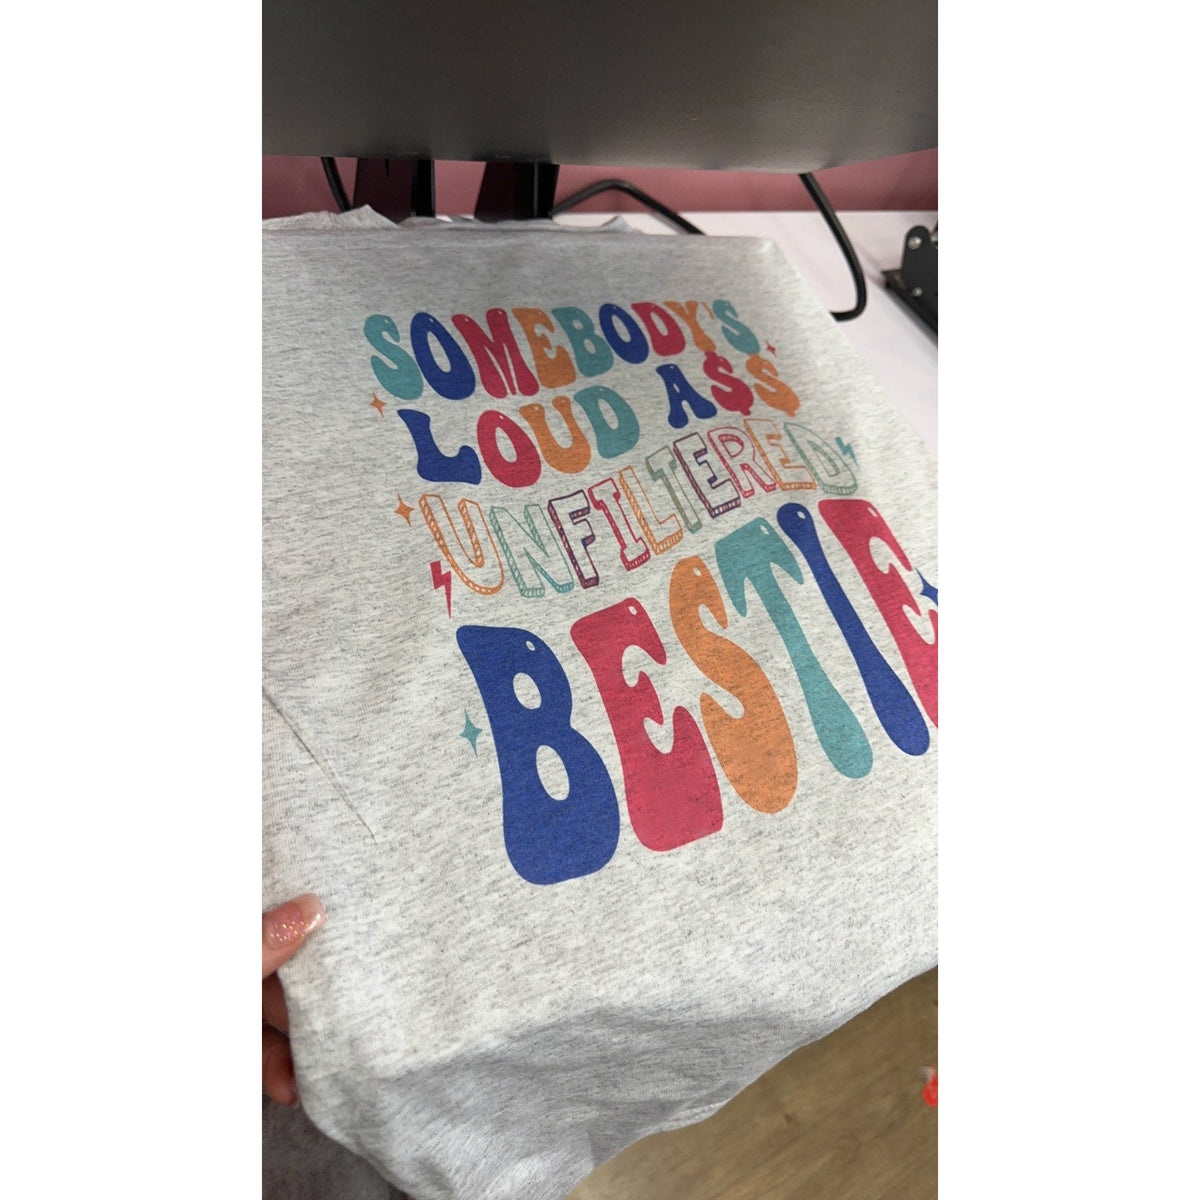 Colorful somebody&#39;s Loud Ass Unfiltered BESTIE Tee